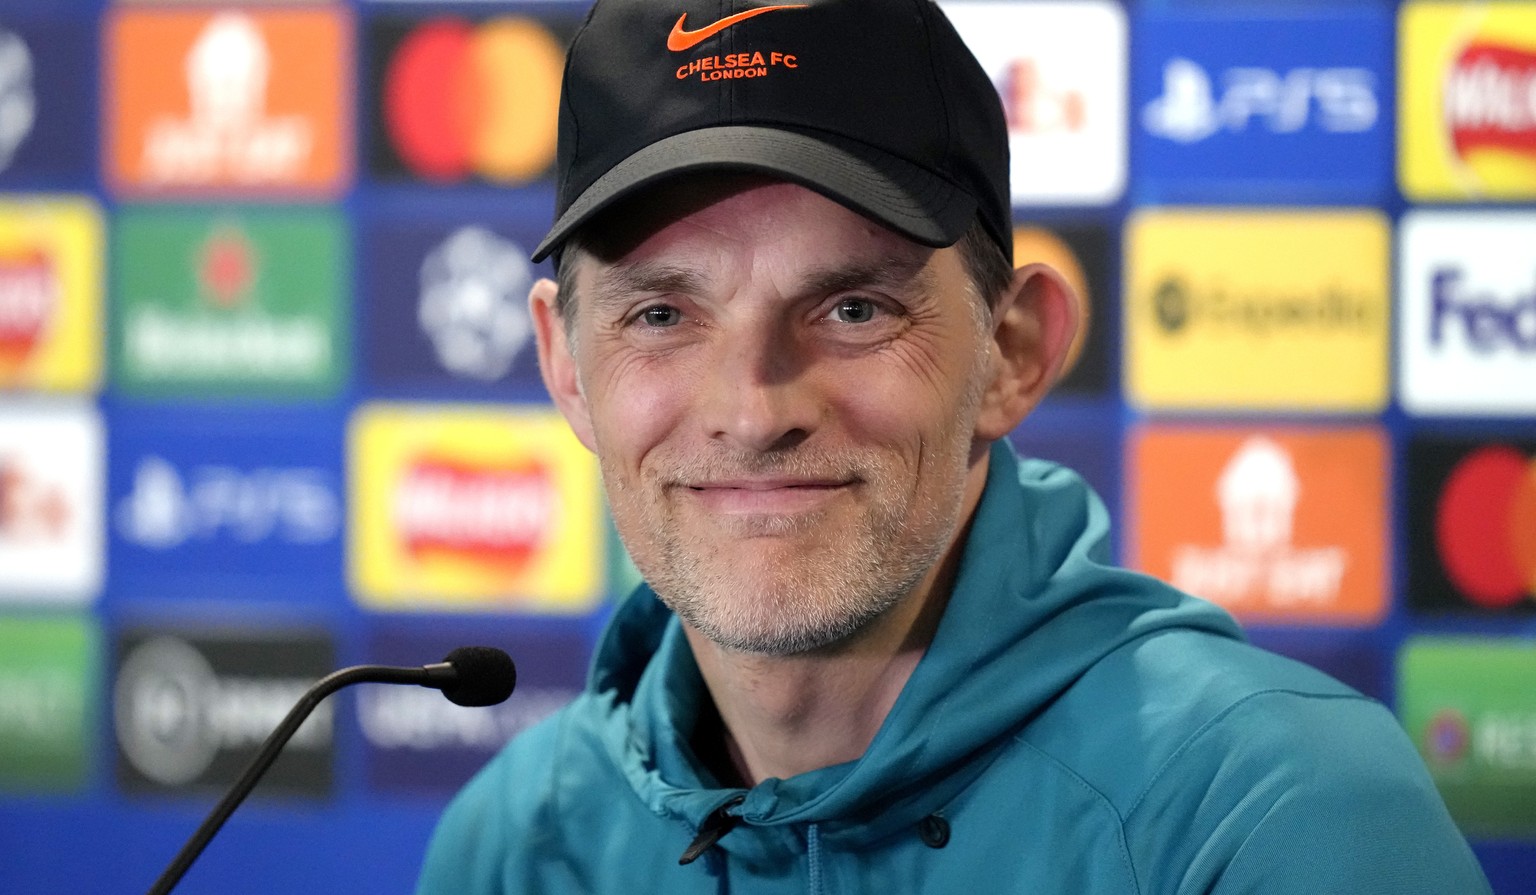 Chelsea&#039;s head coach Thomas Tuchel smiles during a press conference ahead of Wednesday&#039;s Champions League first-leg quarterfinal soccer match between Chelsea and Real Madrid at Stamford Brid ...